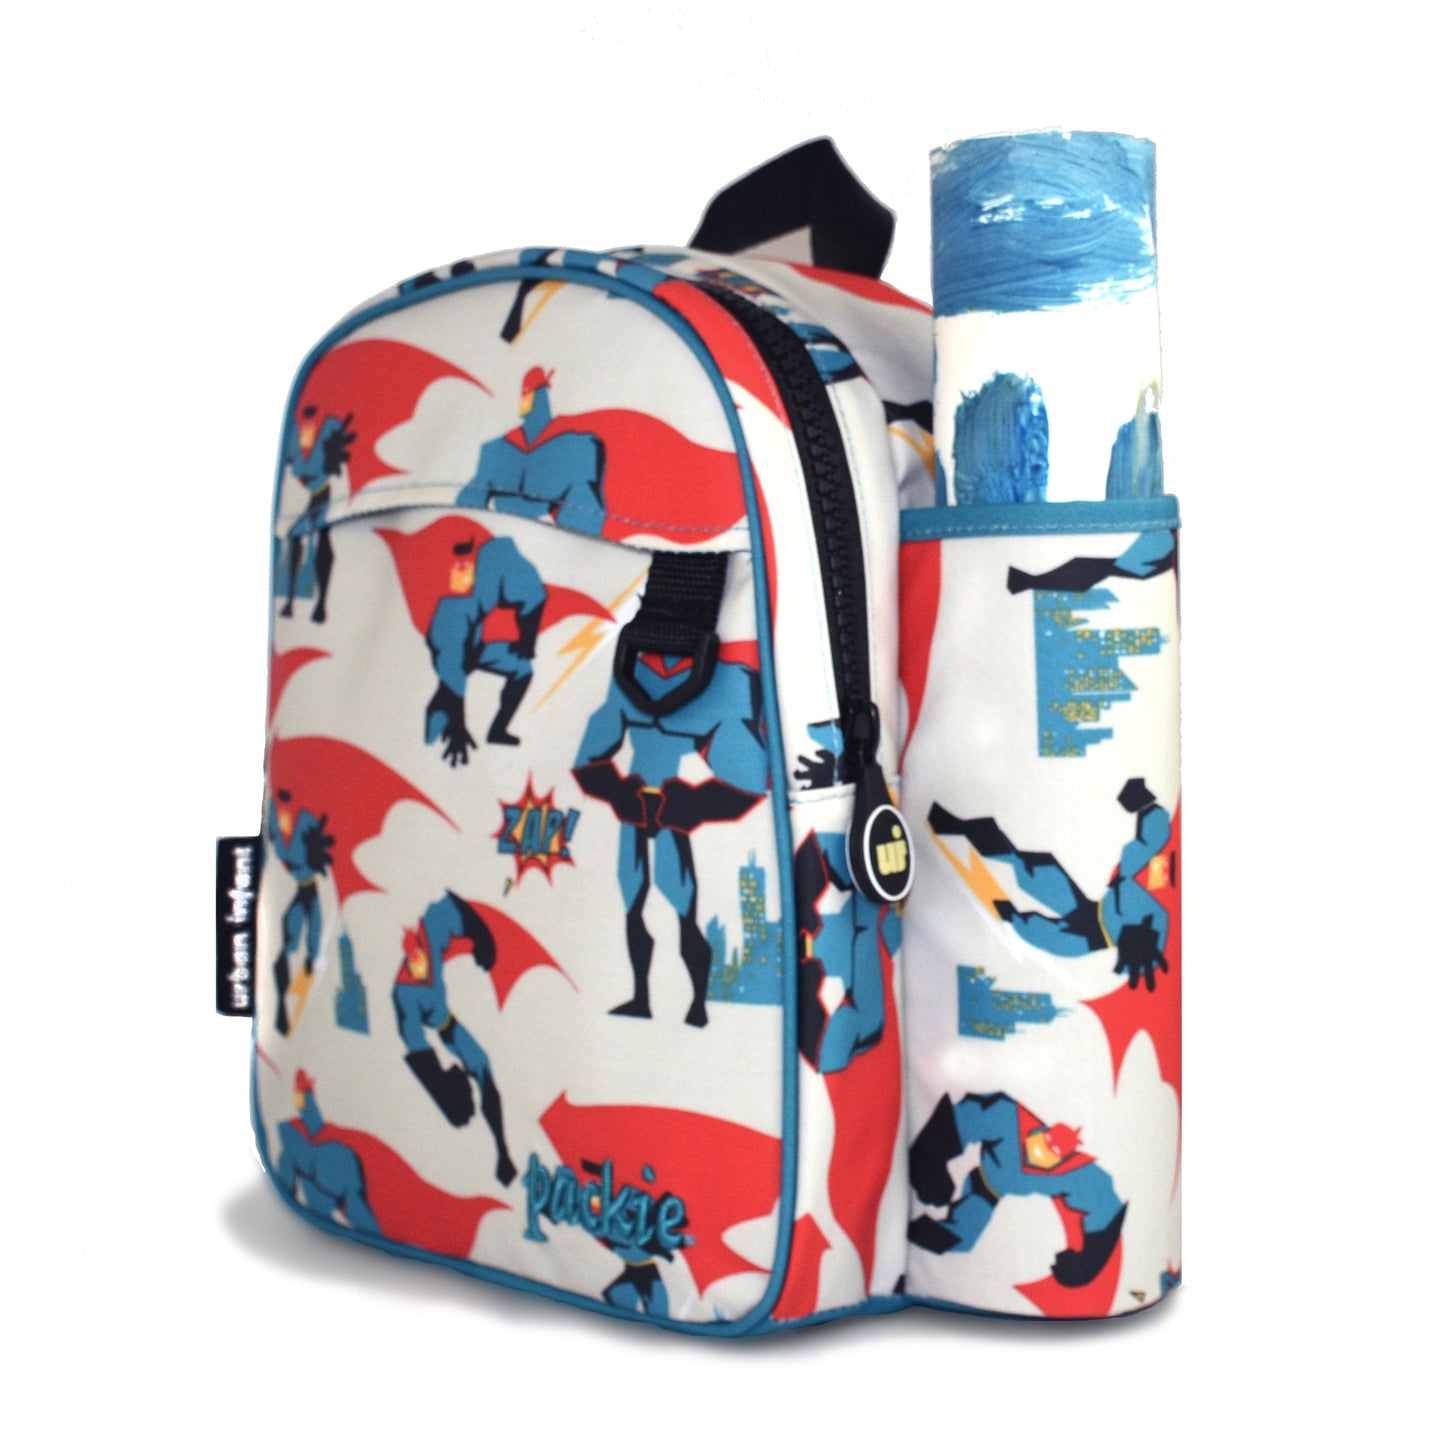 Urban Infant Packie Toddler Backpack - Urban Dude